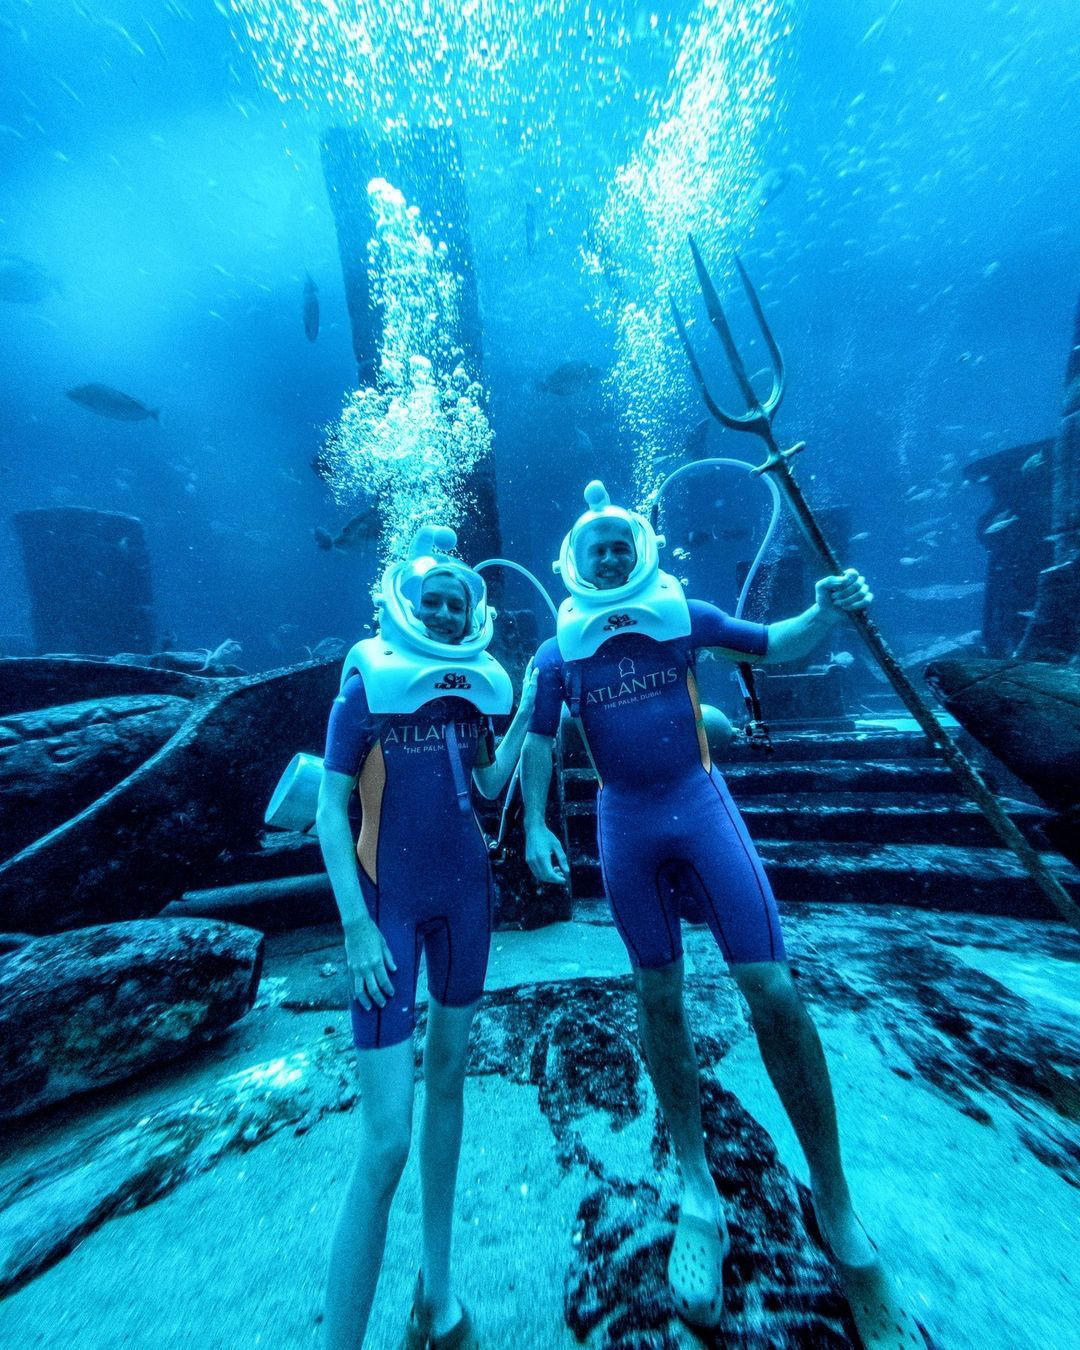 Atlantis The Palm, Dubai - Say YES to extraordinary experiences and try our record-breaking Aquatrek